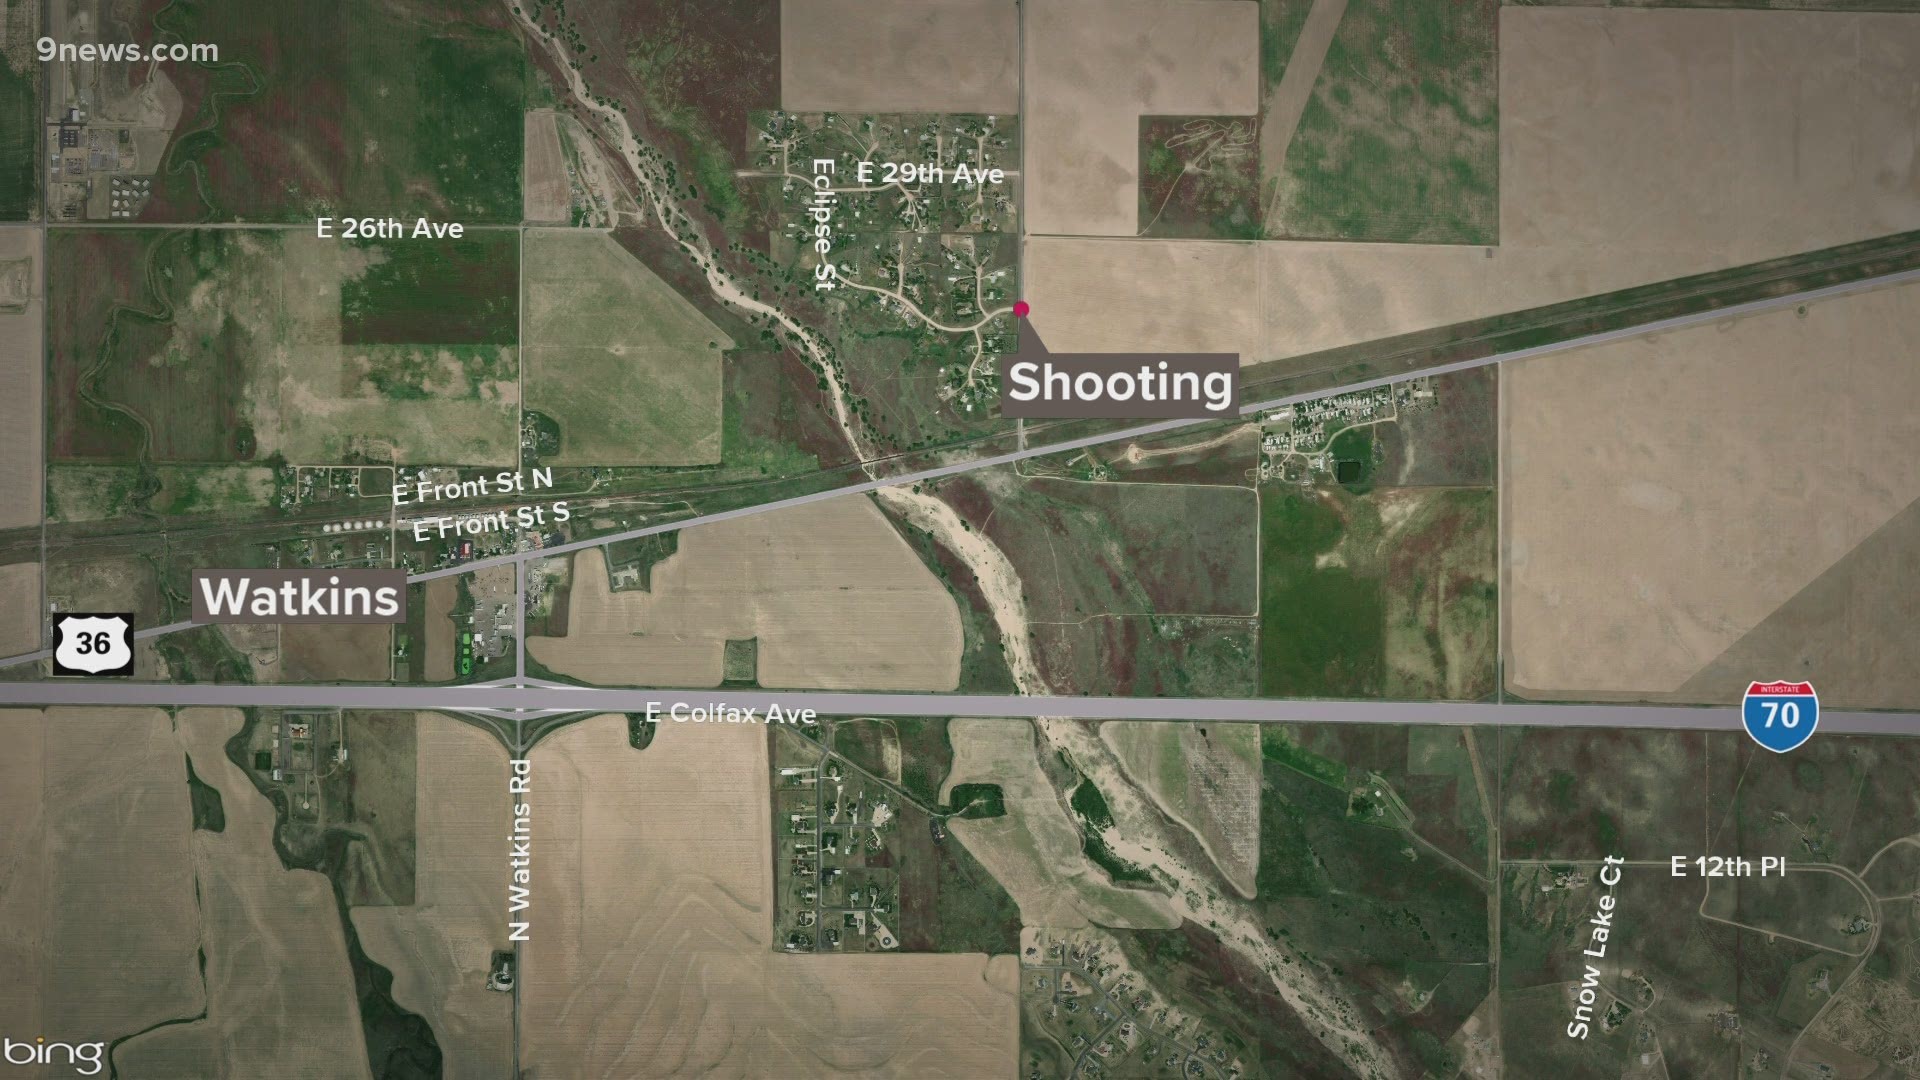 A woman was killed following a chase that led to an officer-involved shooting Tuesday morning in Adams County.